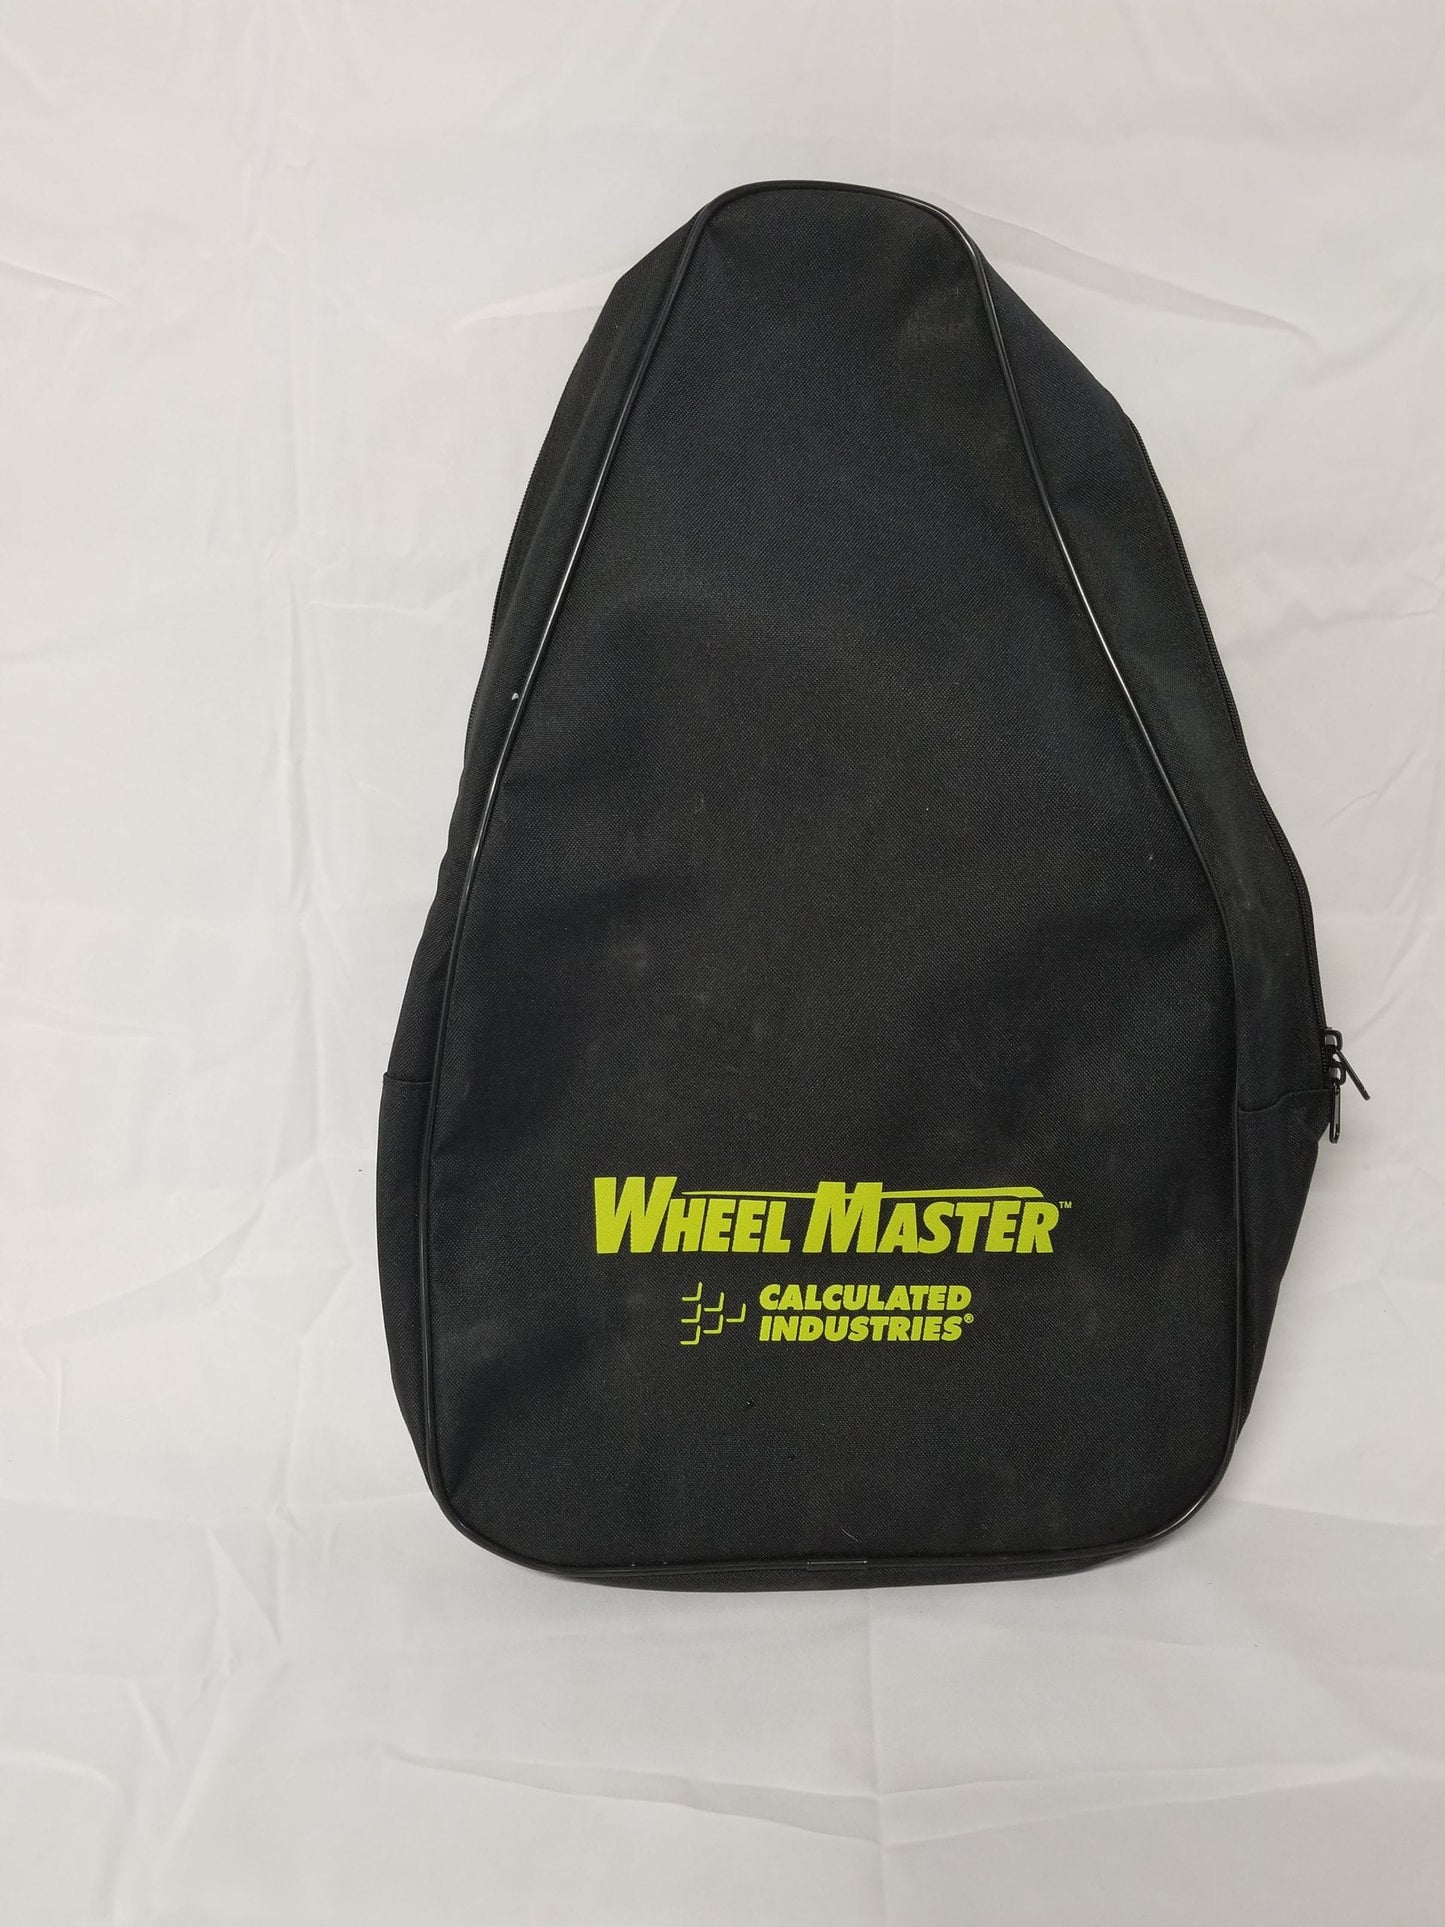 Calculated Industries Measuring Wheel Master Carrying Case